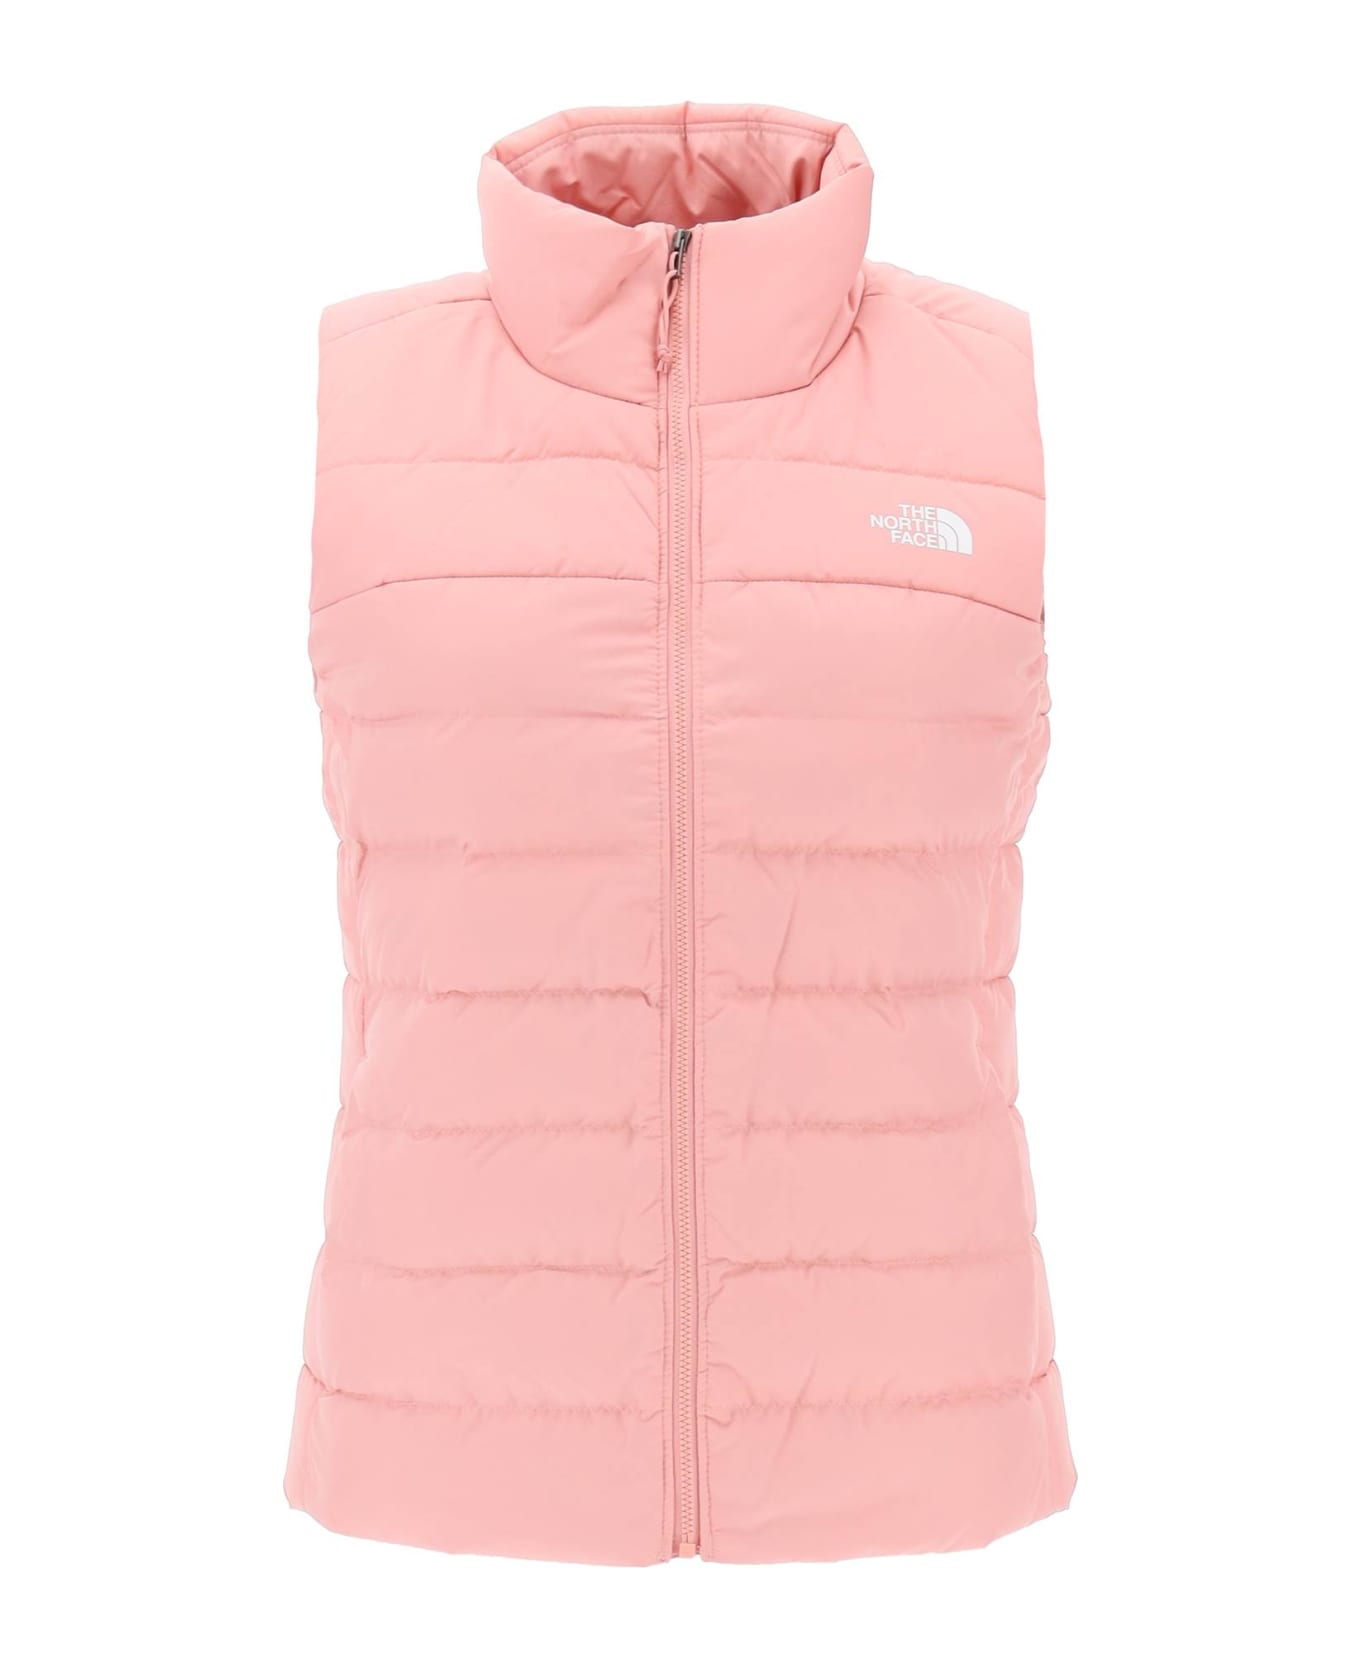 The North Face Akoncagua Lightweight Puffer Vest - SHADY ROSE (Pink)